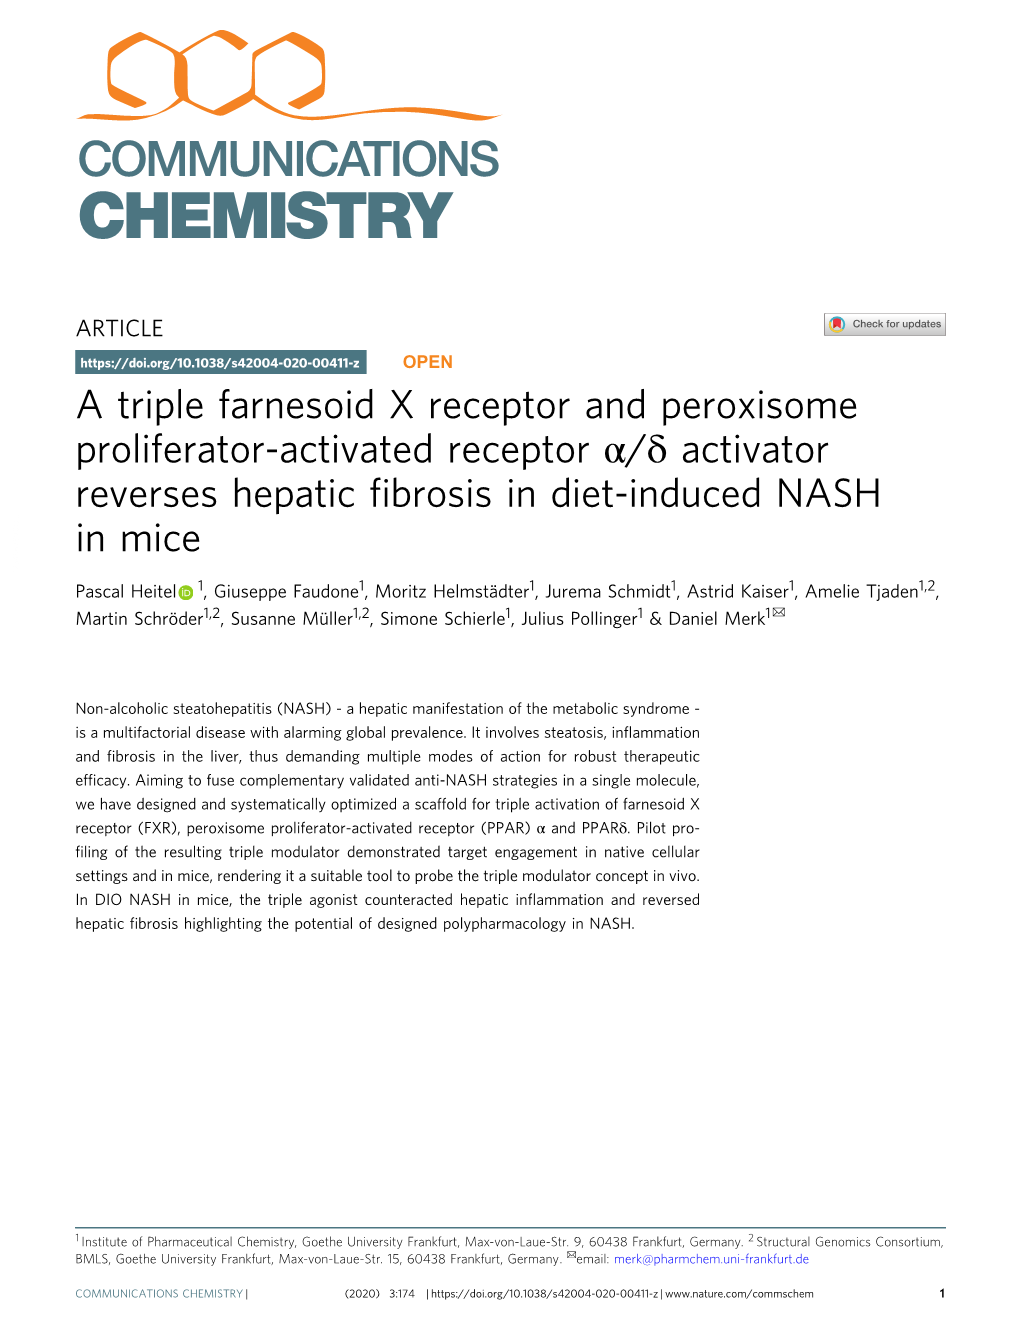 A Triple Farnesoid X Receptor and Peroxisome Proliferator-Activated